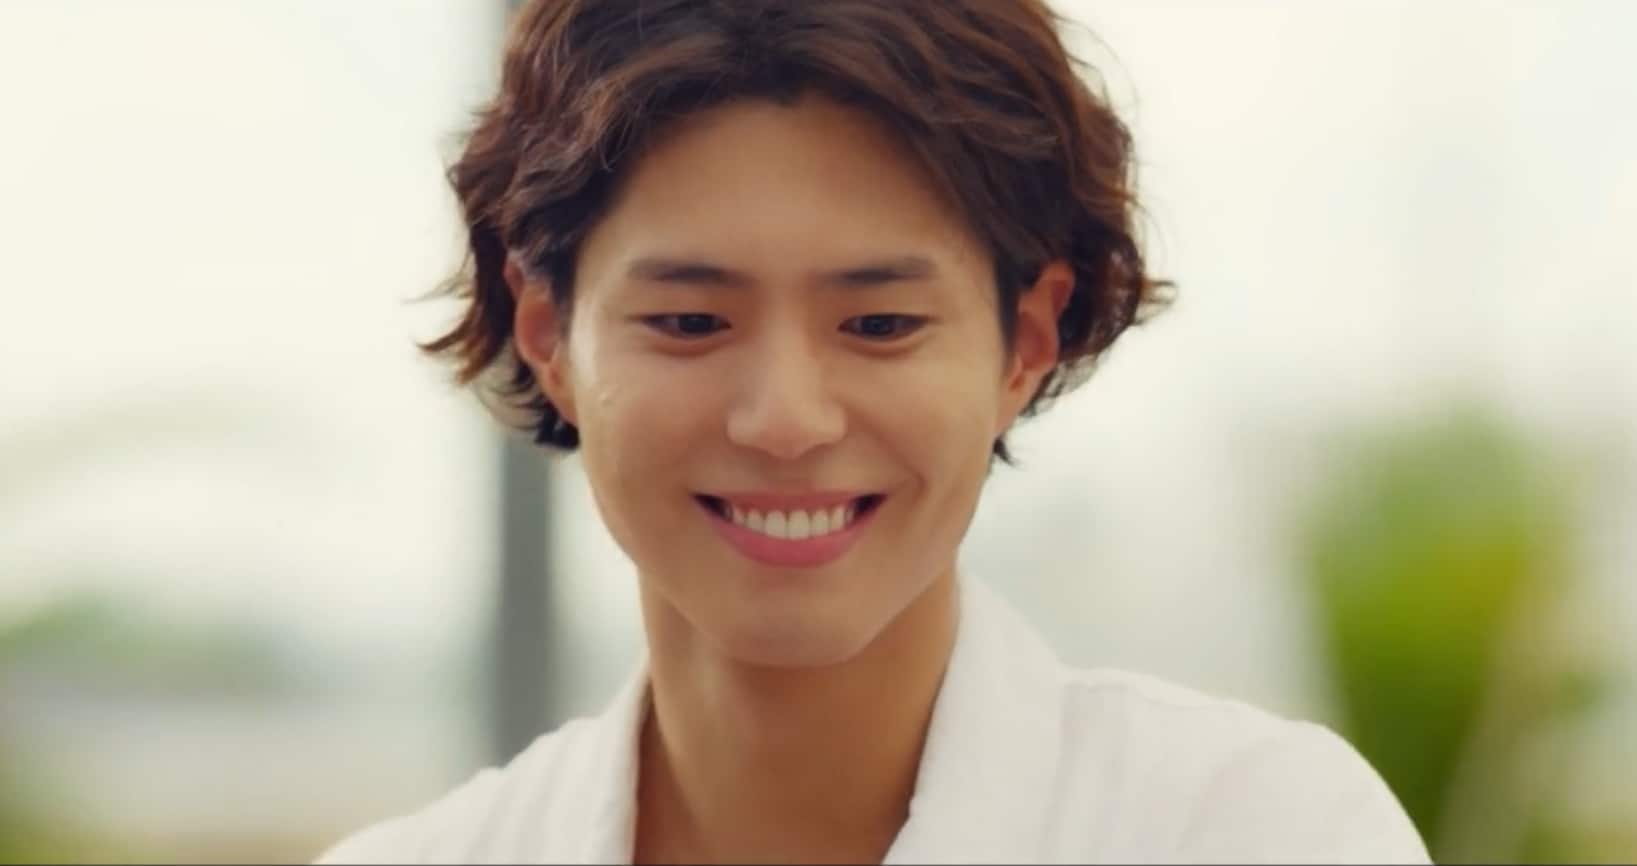 Park Bogum playing the lead role in Encounter